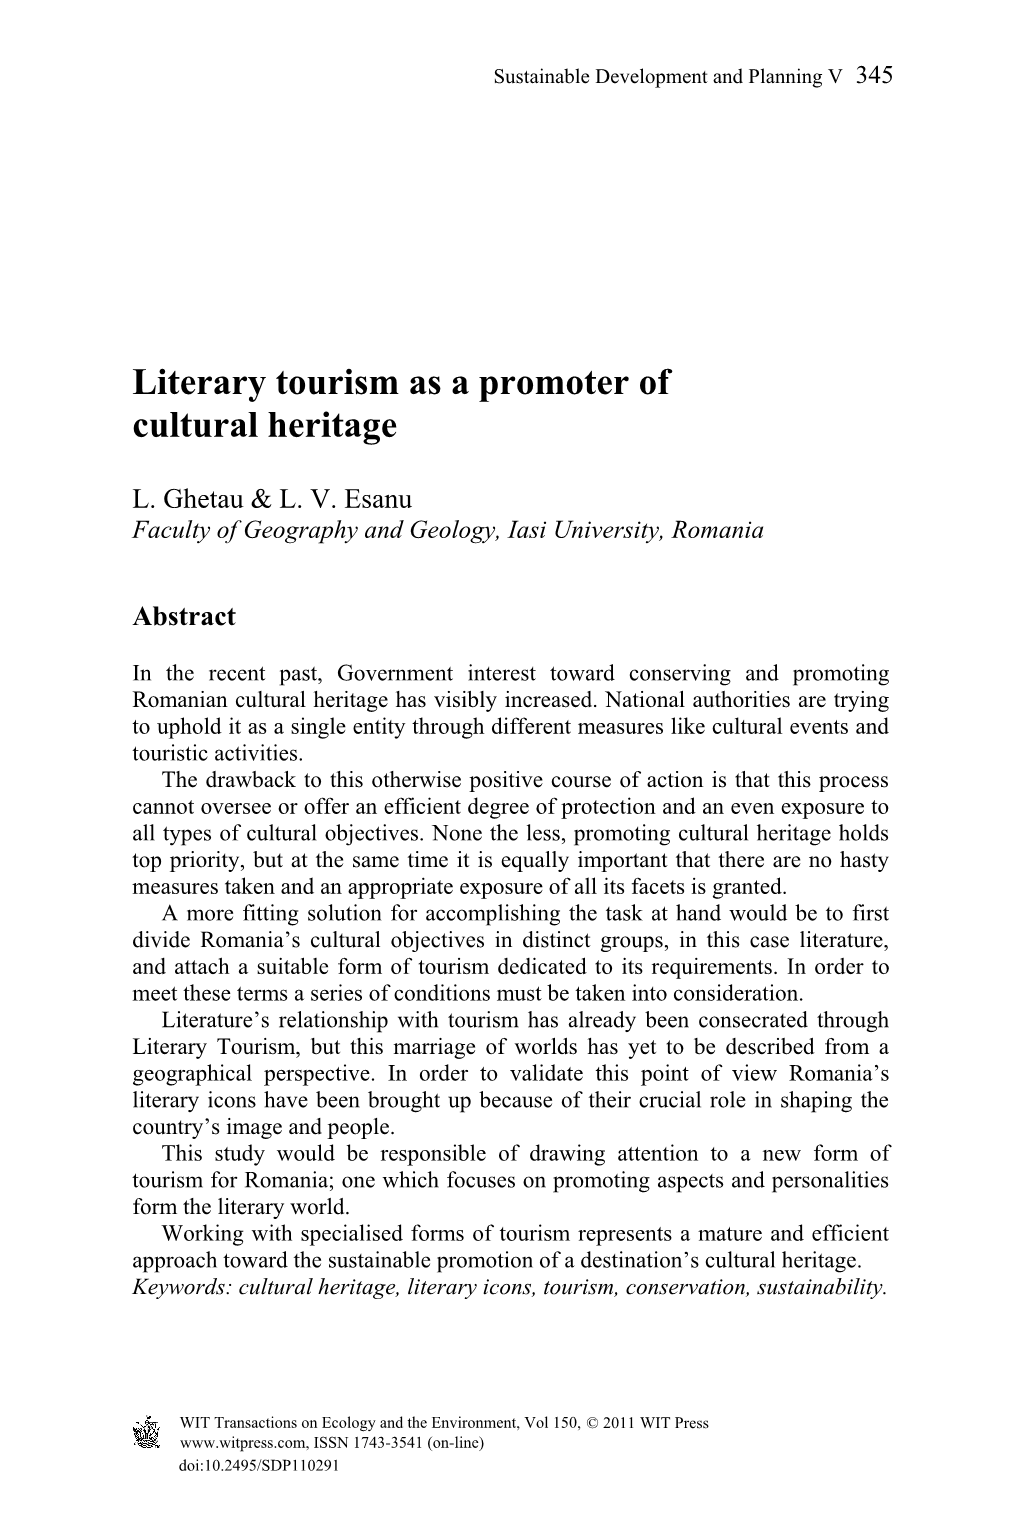 Literary Tourism As a Promoter of Cultural Heritage